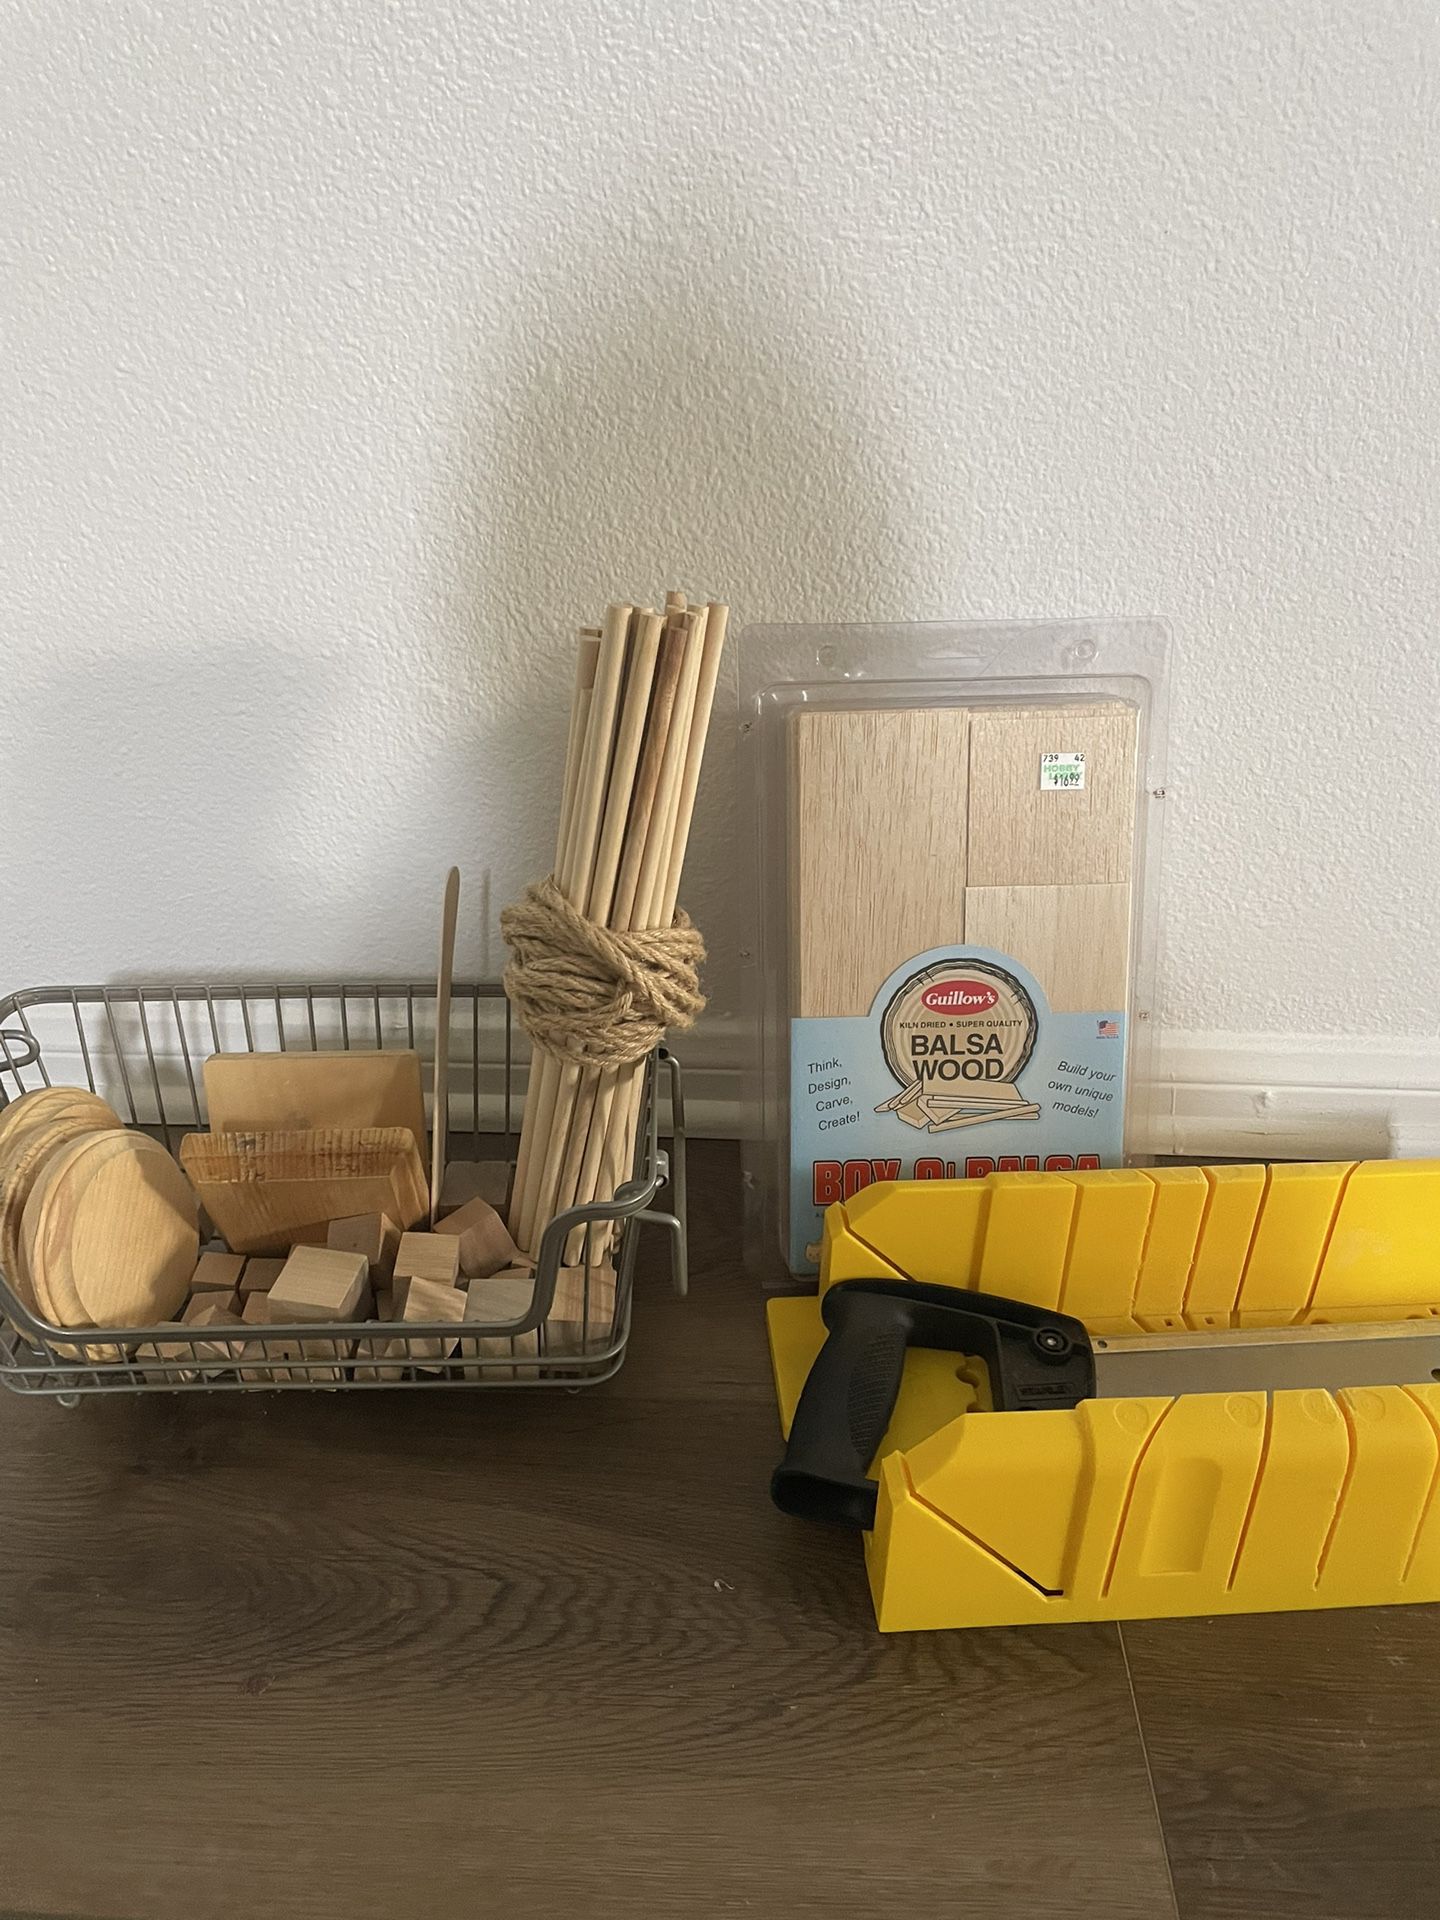 Wood Craft Pieces And Handheld Saw